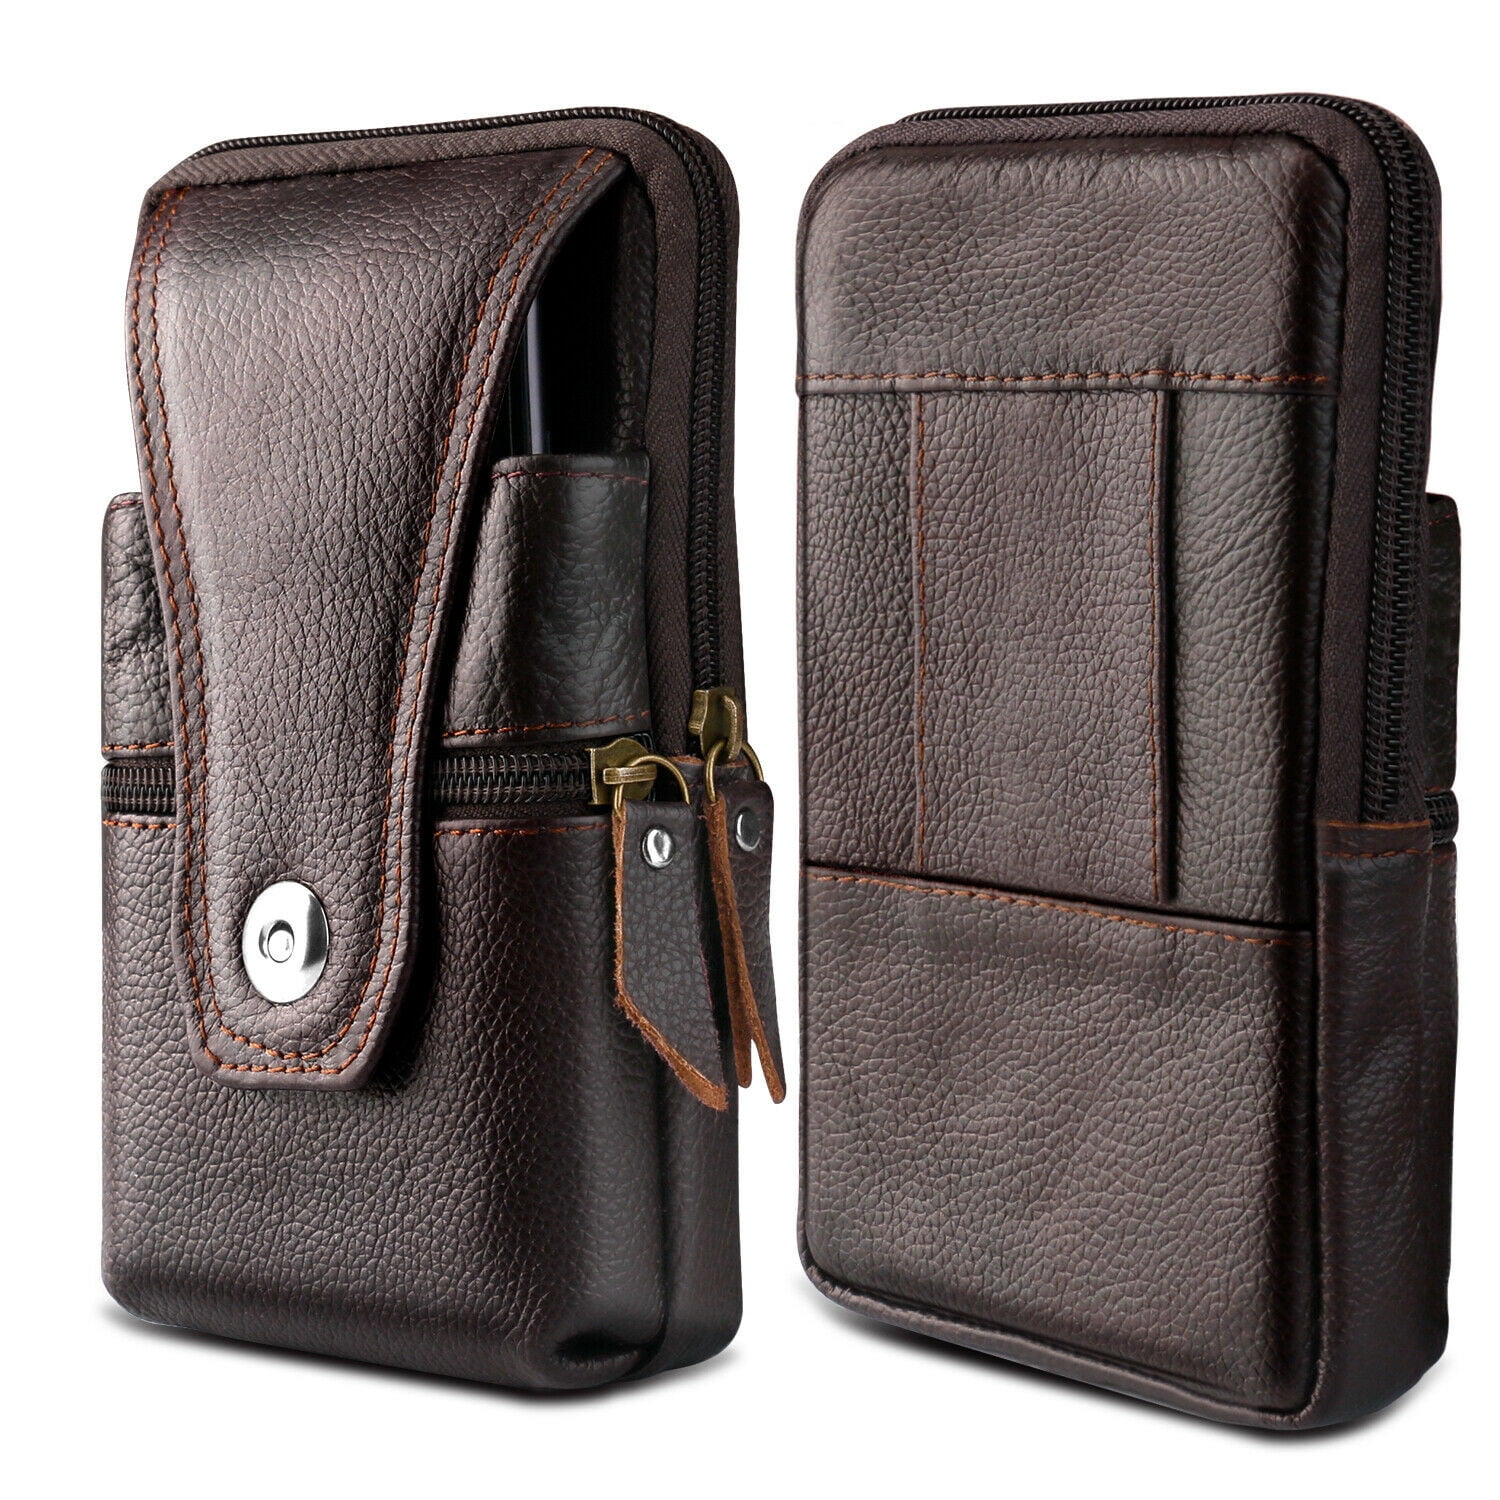 Quinn Cell Pouch – Leatherock